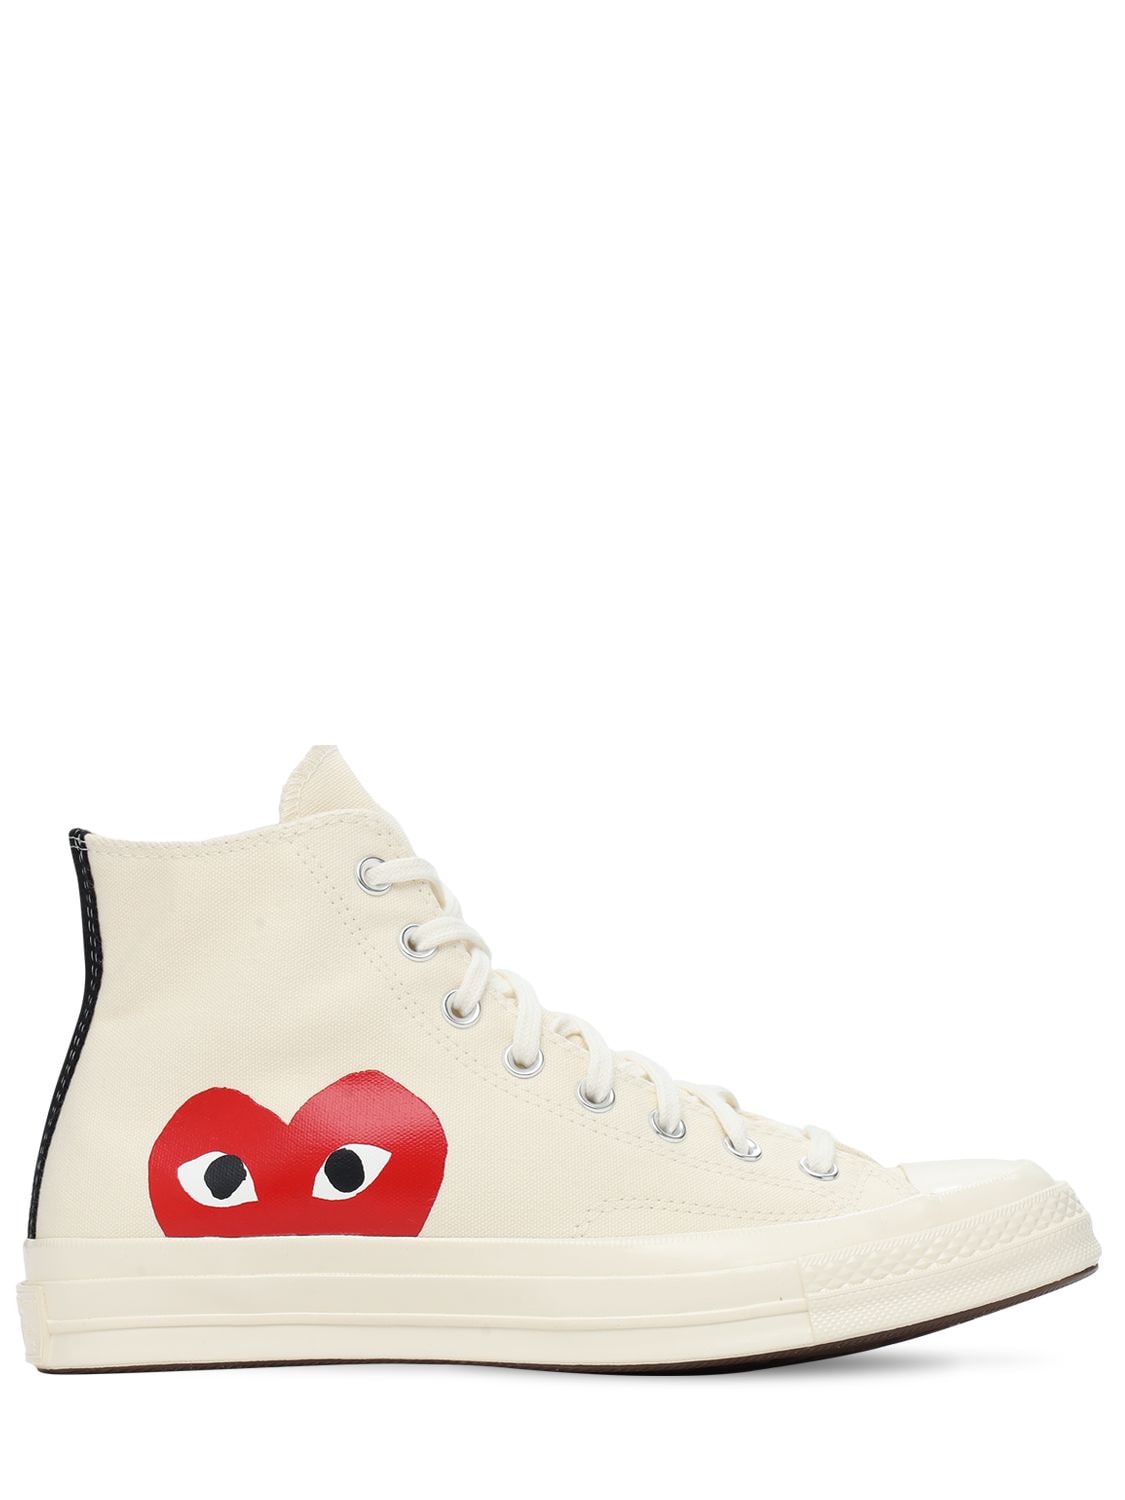 Comme Des Garçons Play Play Converse Cotton High Sneakers In Off-white